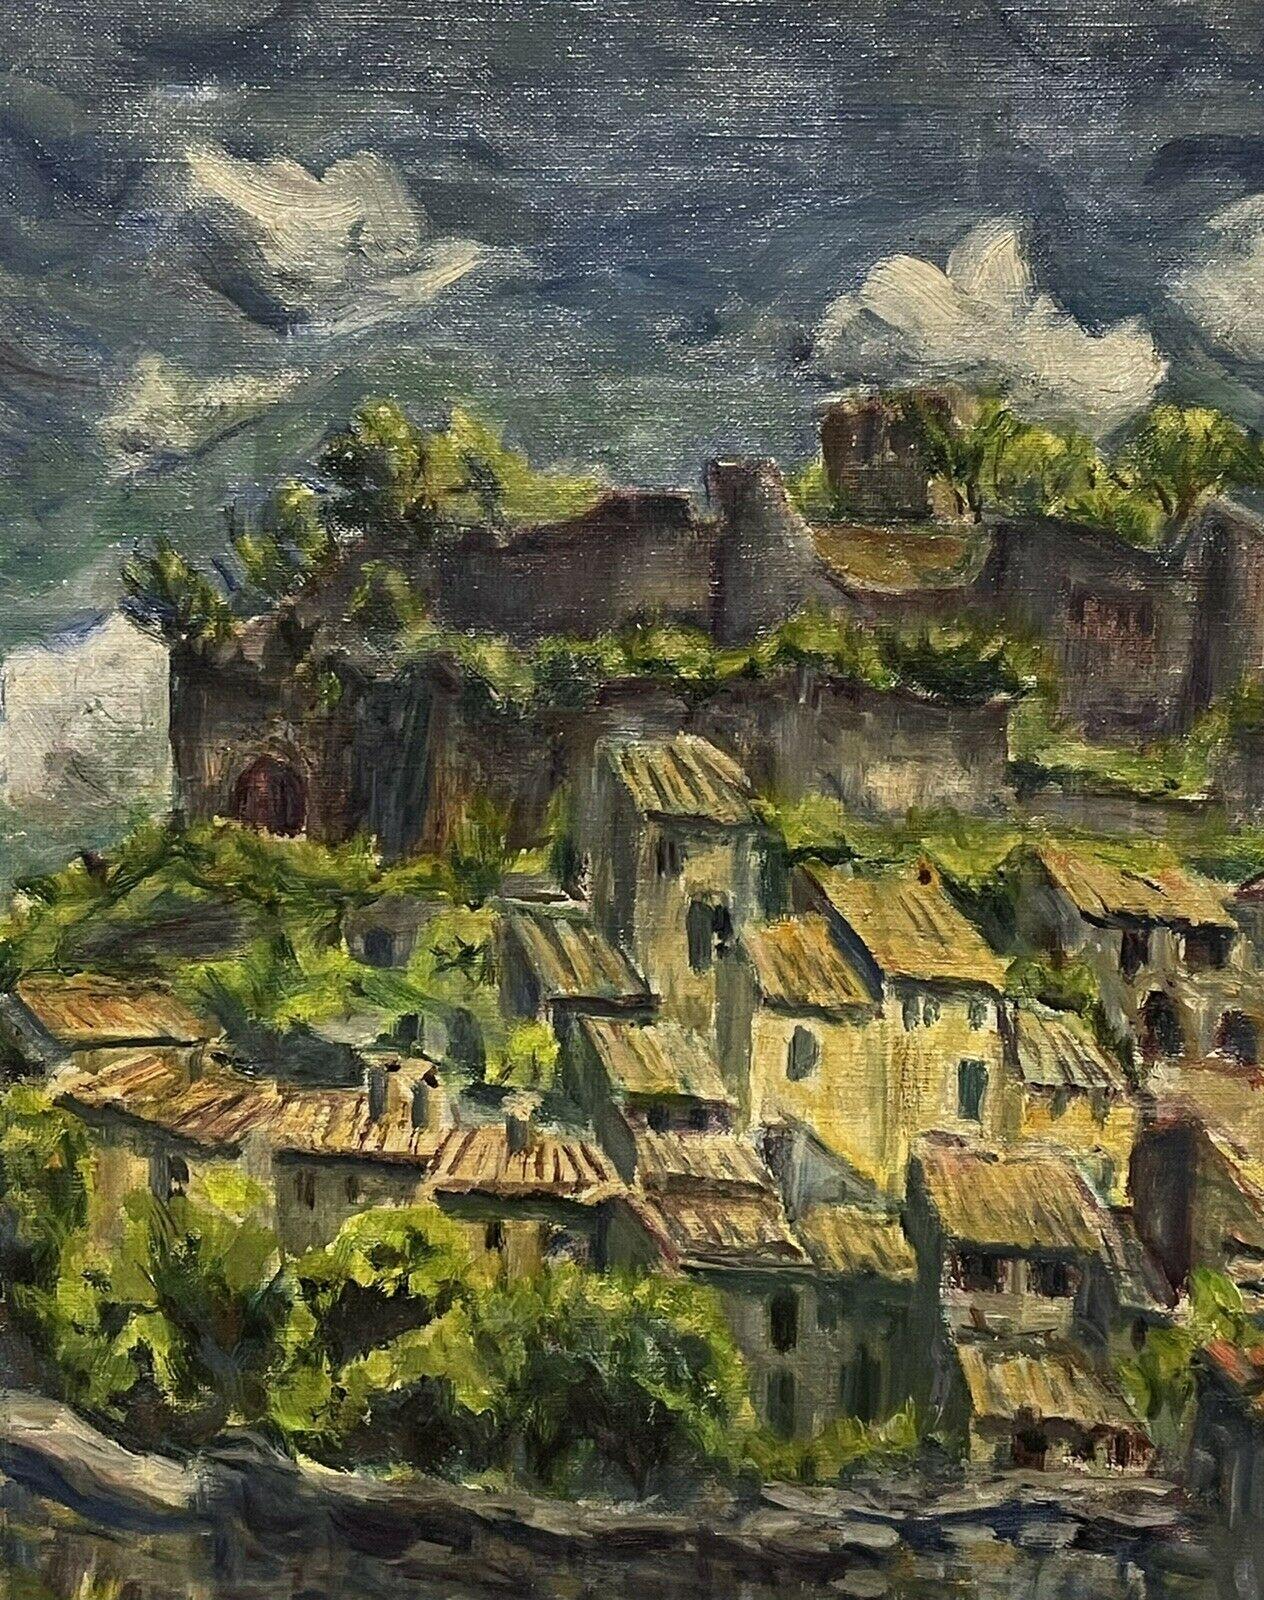 Artist/ School: French School, signed, mid 20th century

Title: Castellar (Provence), fully titled verso with details of the chateau depicted. 

Medium: signed oil painting on canvas, framed and inscribed verso.

framed: 22 x 26.25 inches
canvas: 